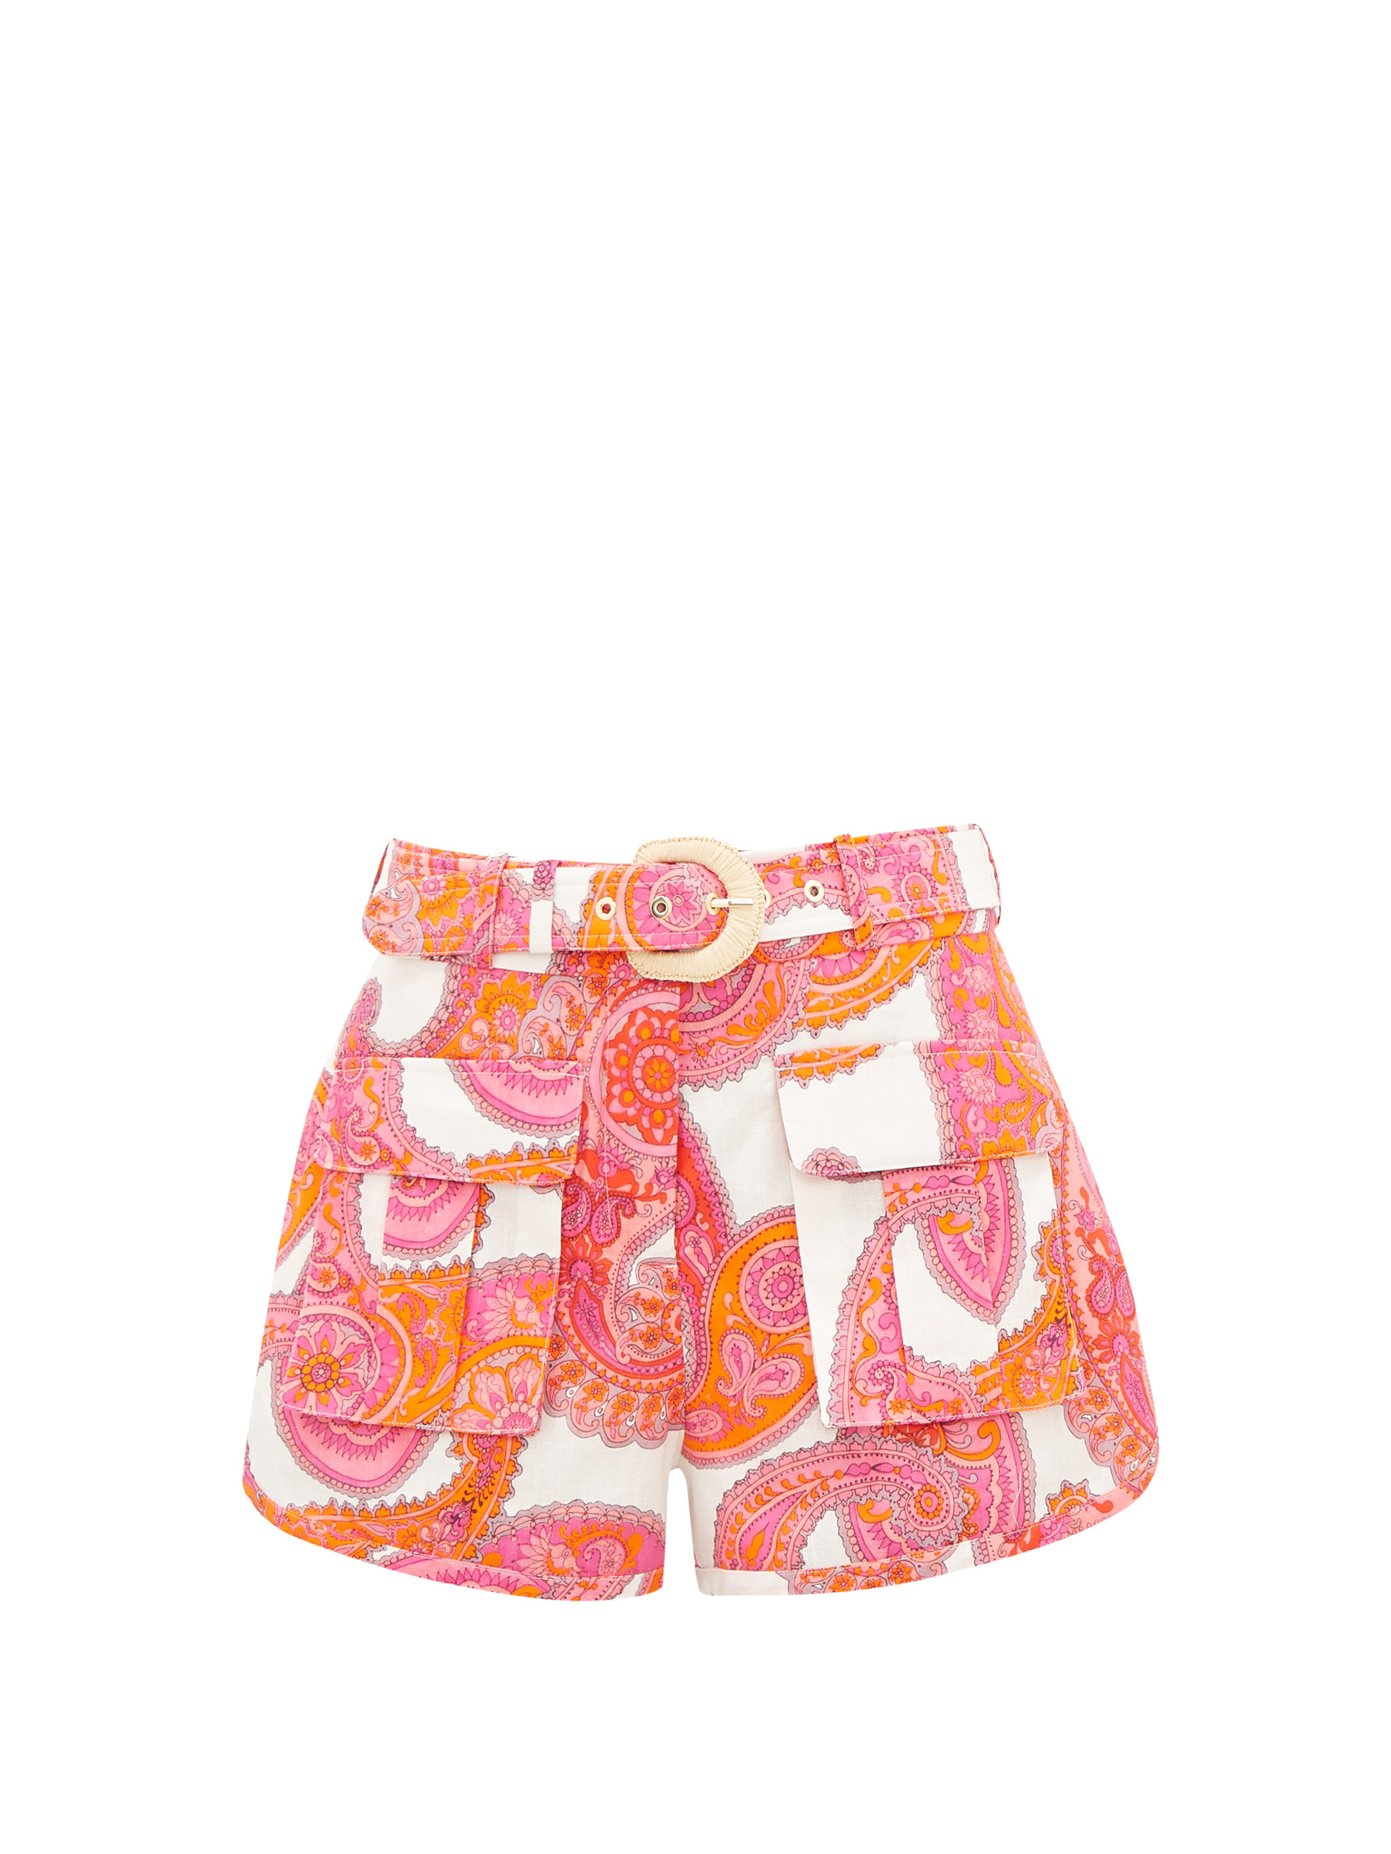 Zimmermann paisley print shorts in pink and orange.